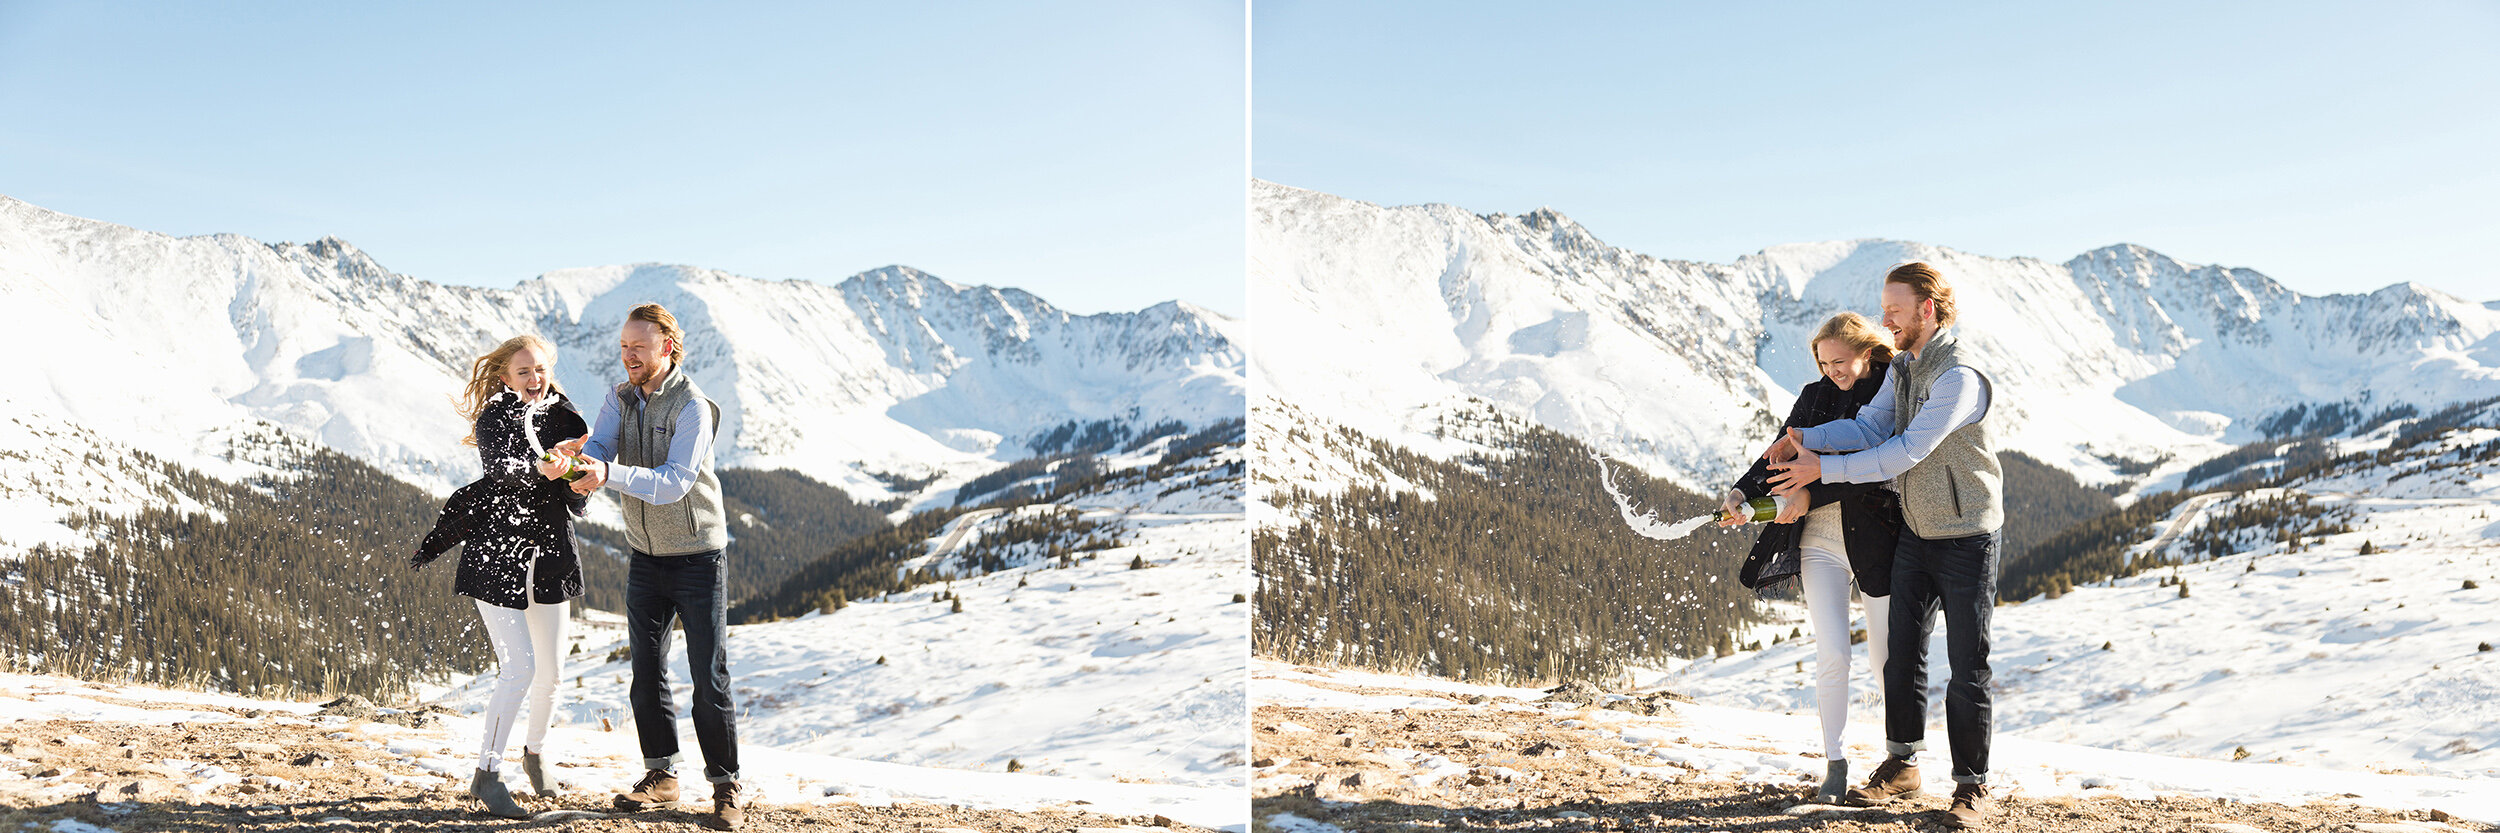 snowy-colorado-engagement-photos-in-the-forest-by-jackie-cooper-photo-16.jpg